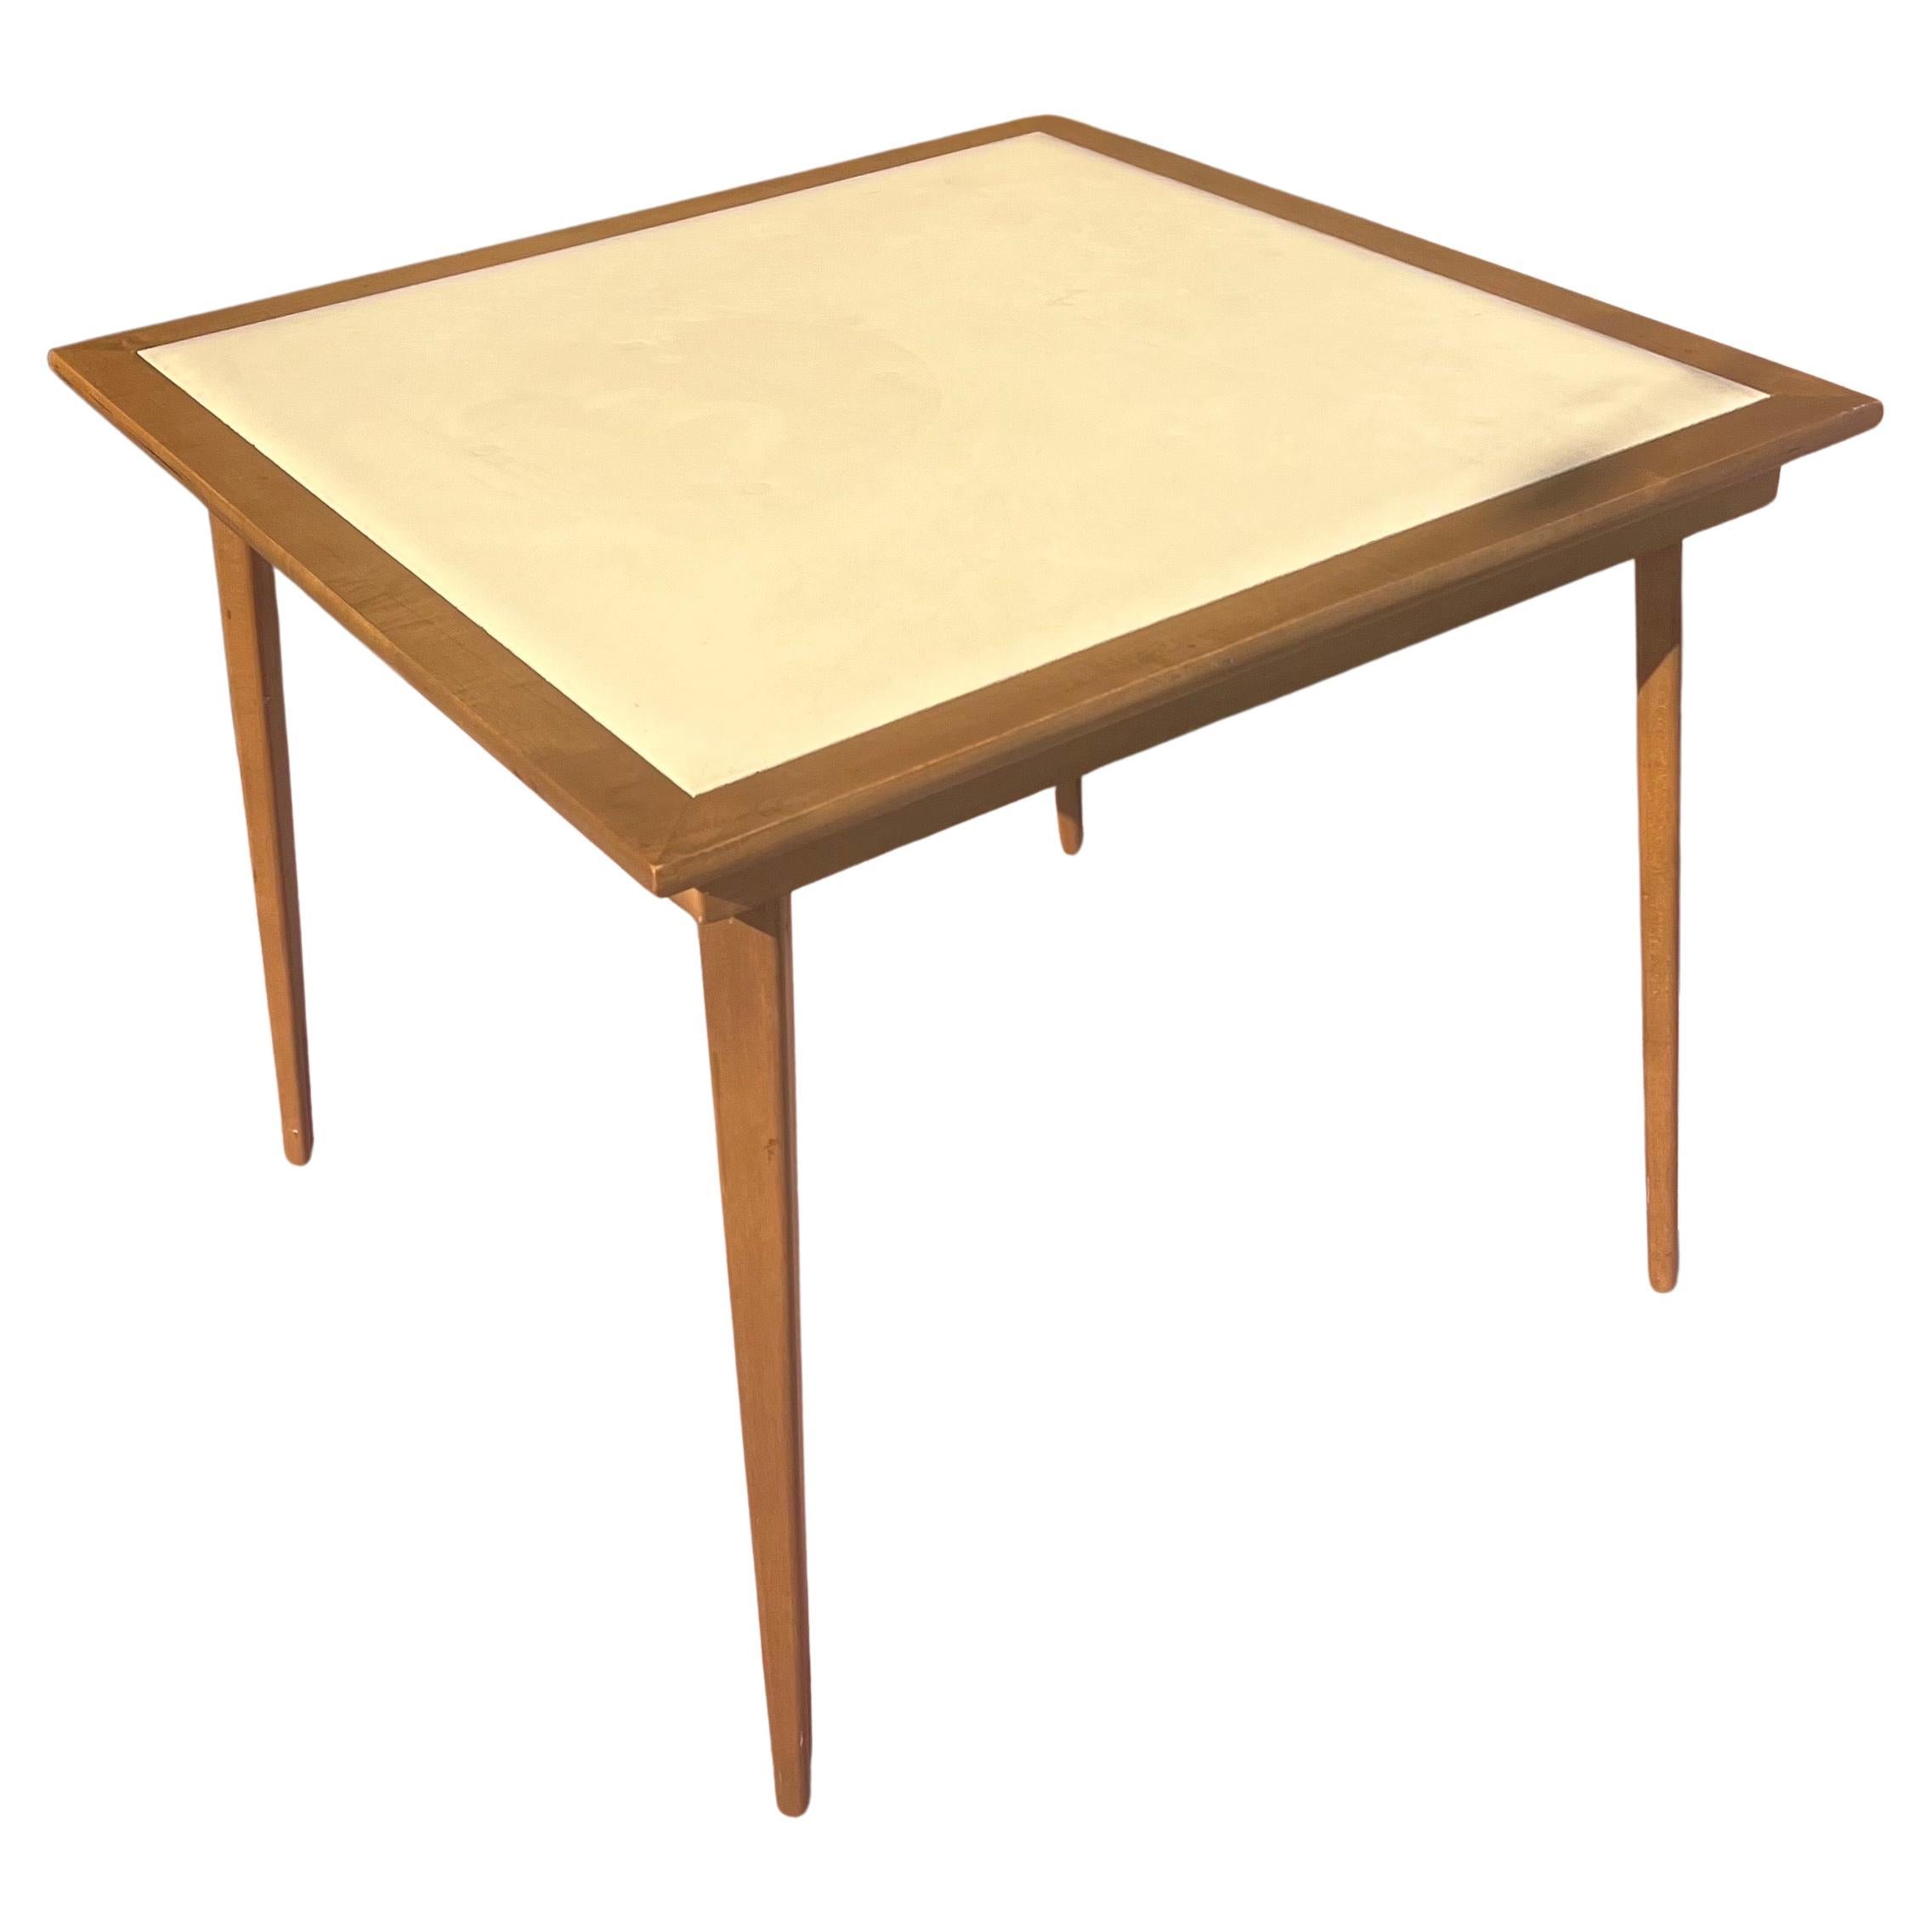 1950's American Mid Century atomic Age Folding Table in Walnut & Naugahyde For Sale